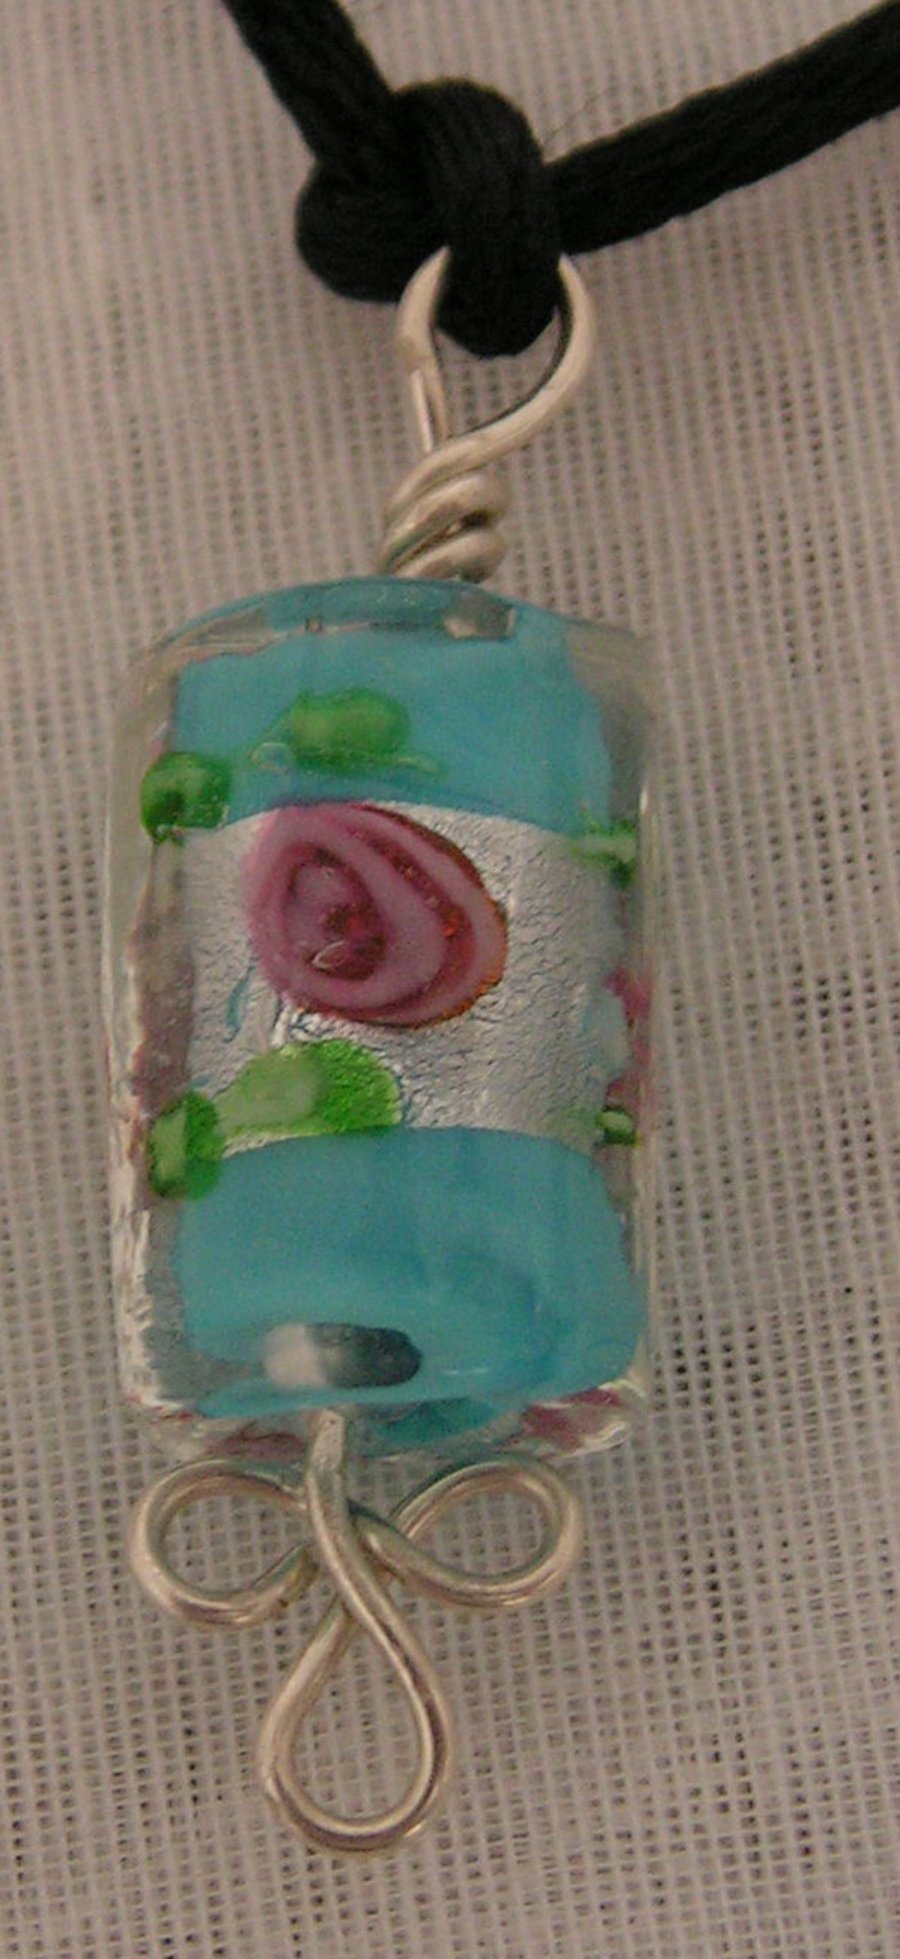 Fused glass floral focal bead pendant